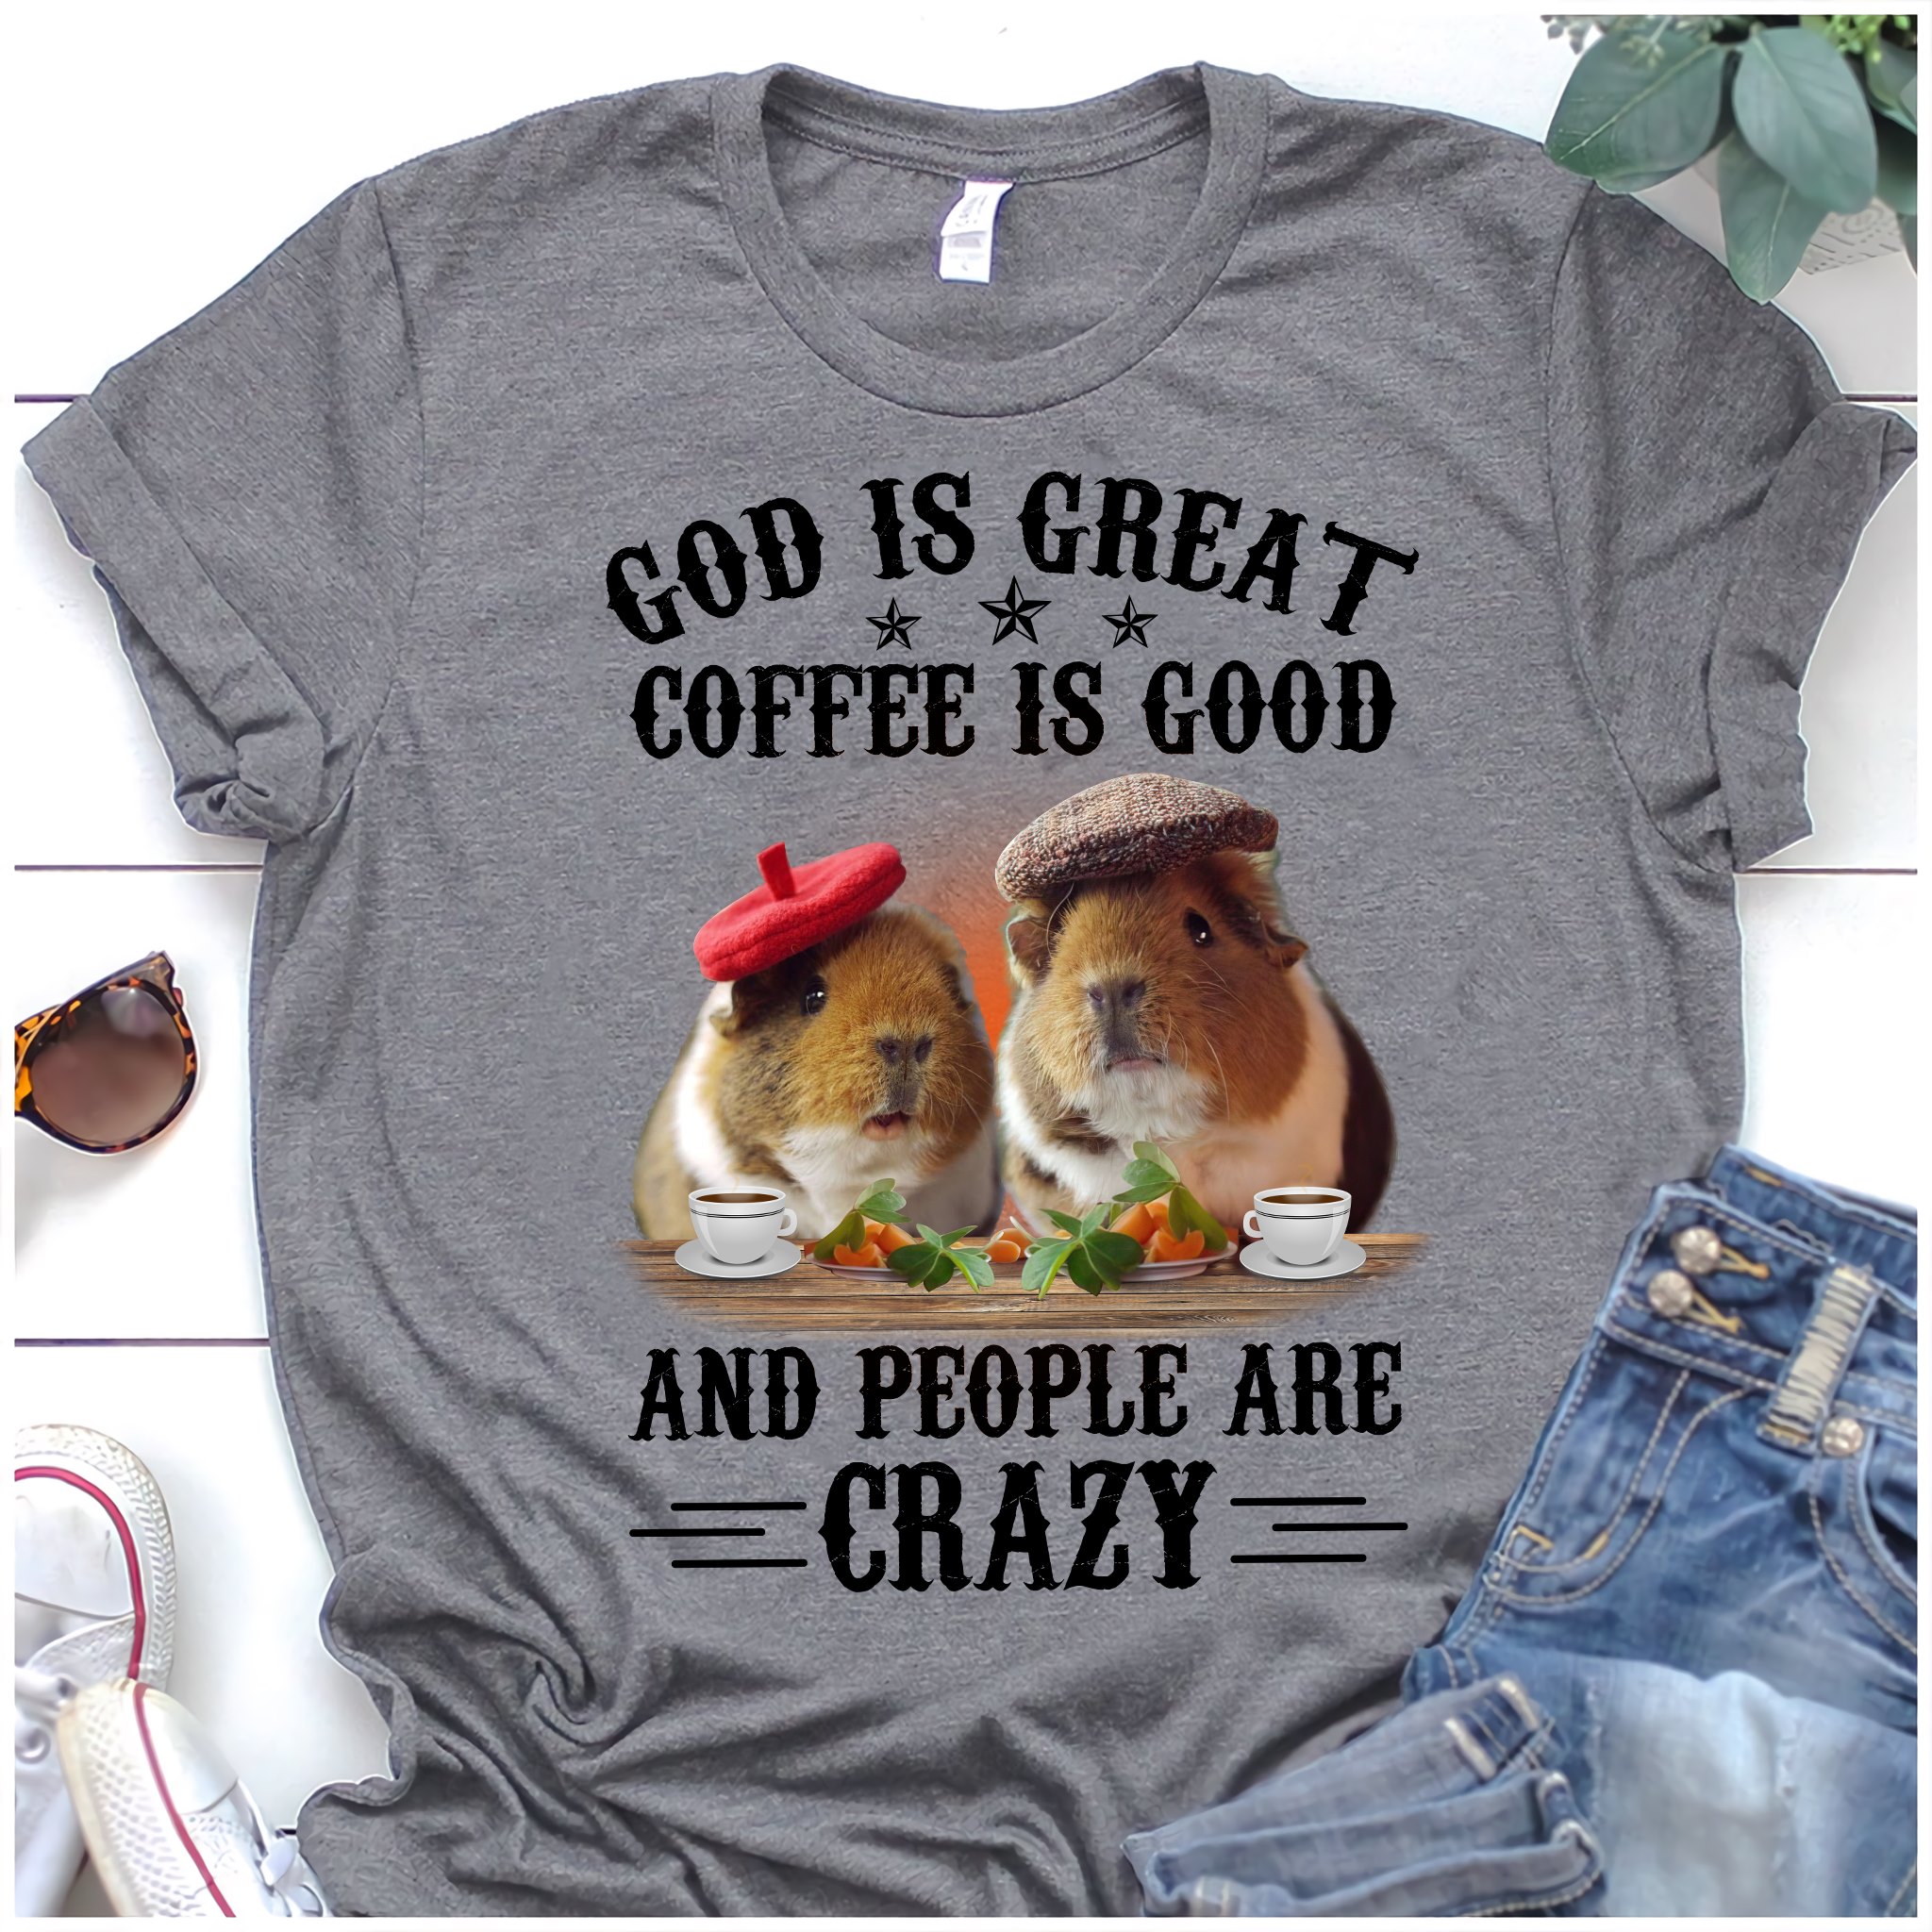 God is great coffee is good and people are crazy - Guinea pig